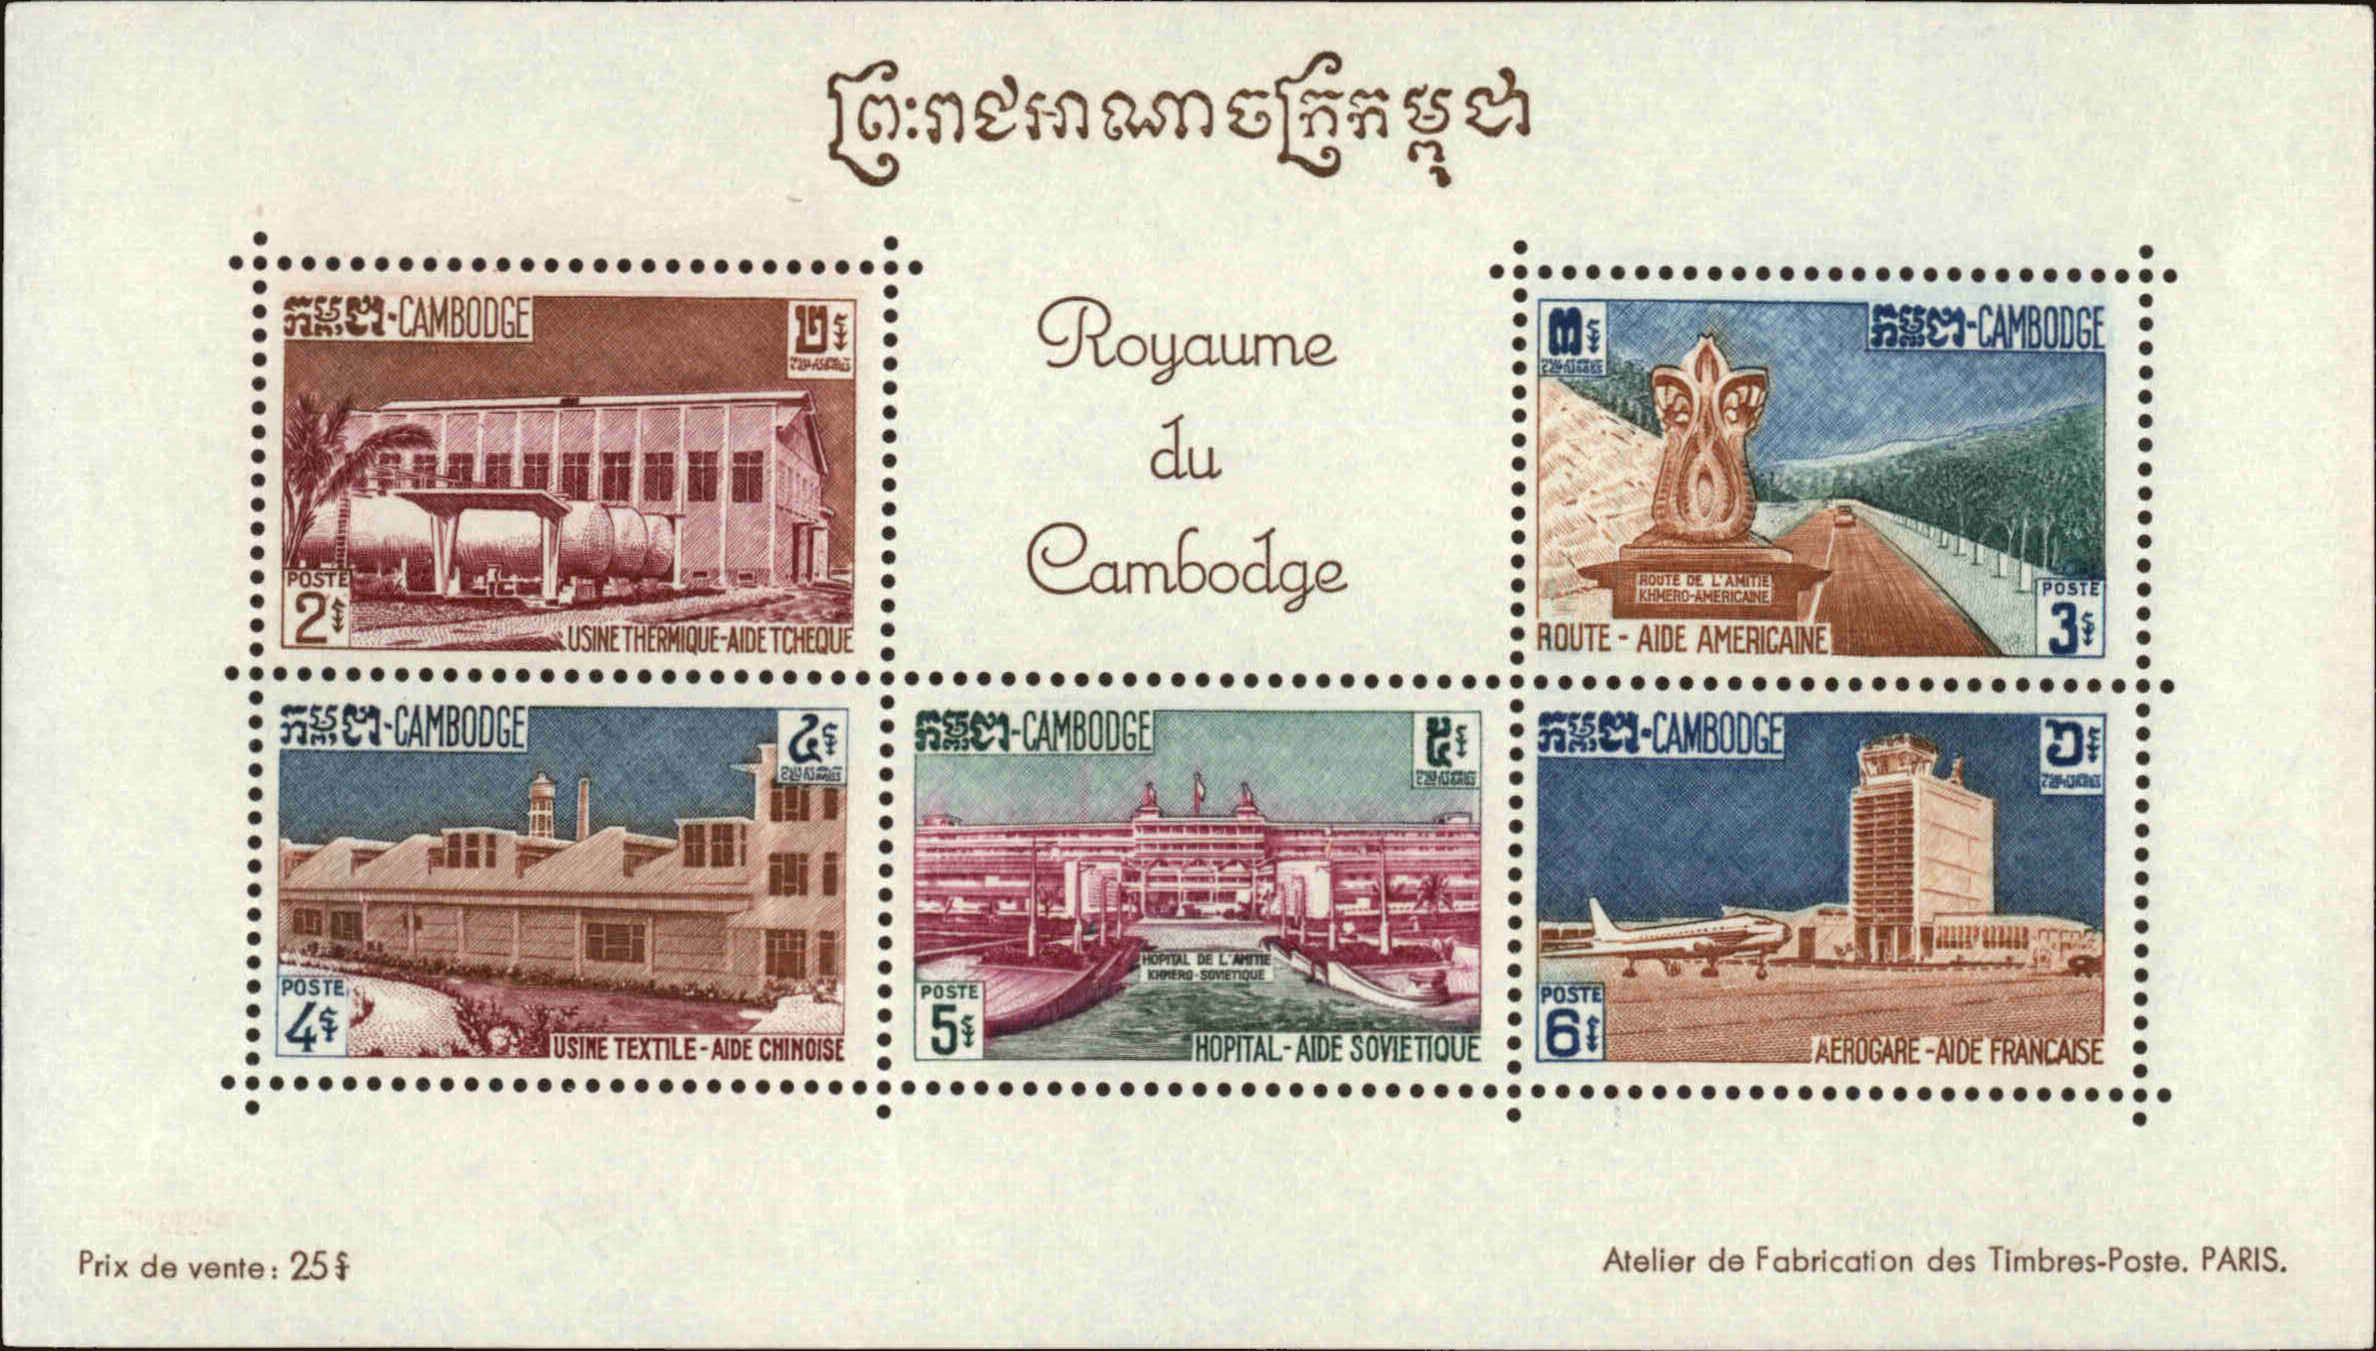 Front view of Cambodia 105a collectors stamp